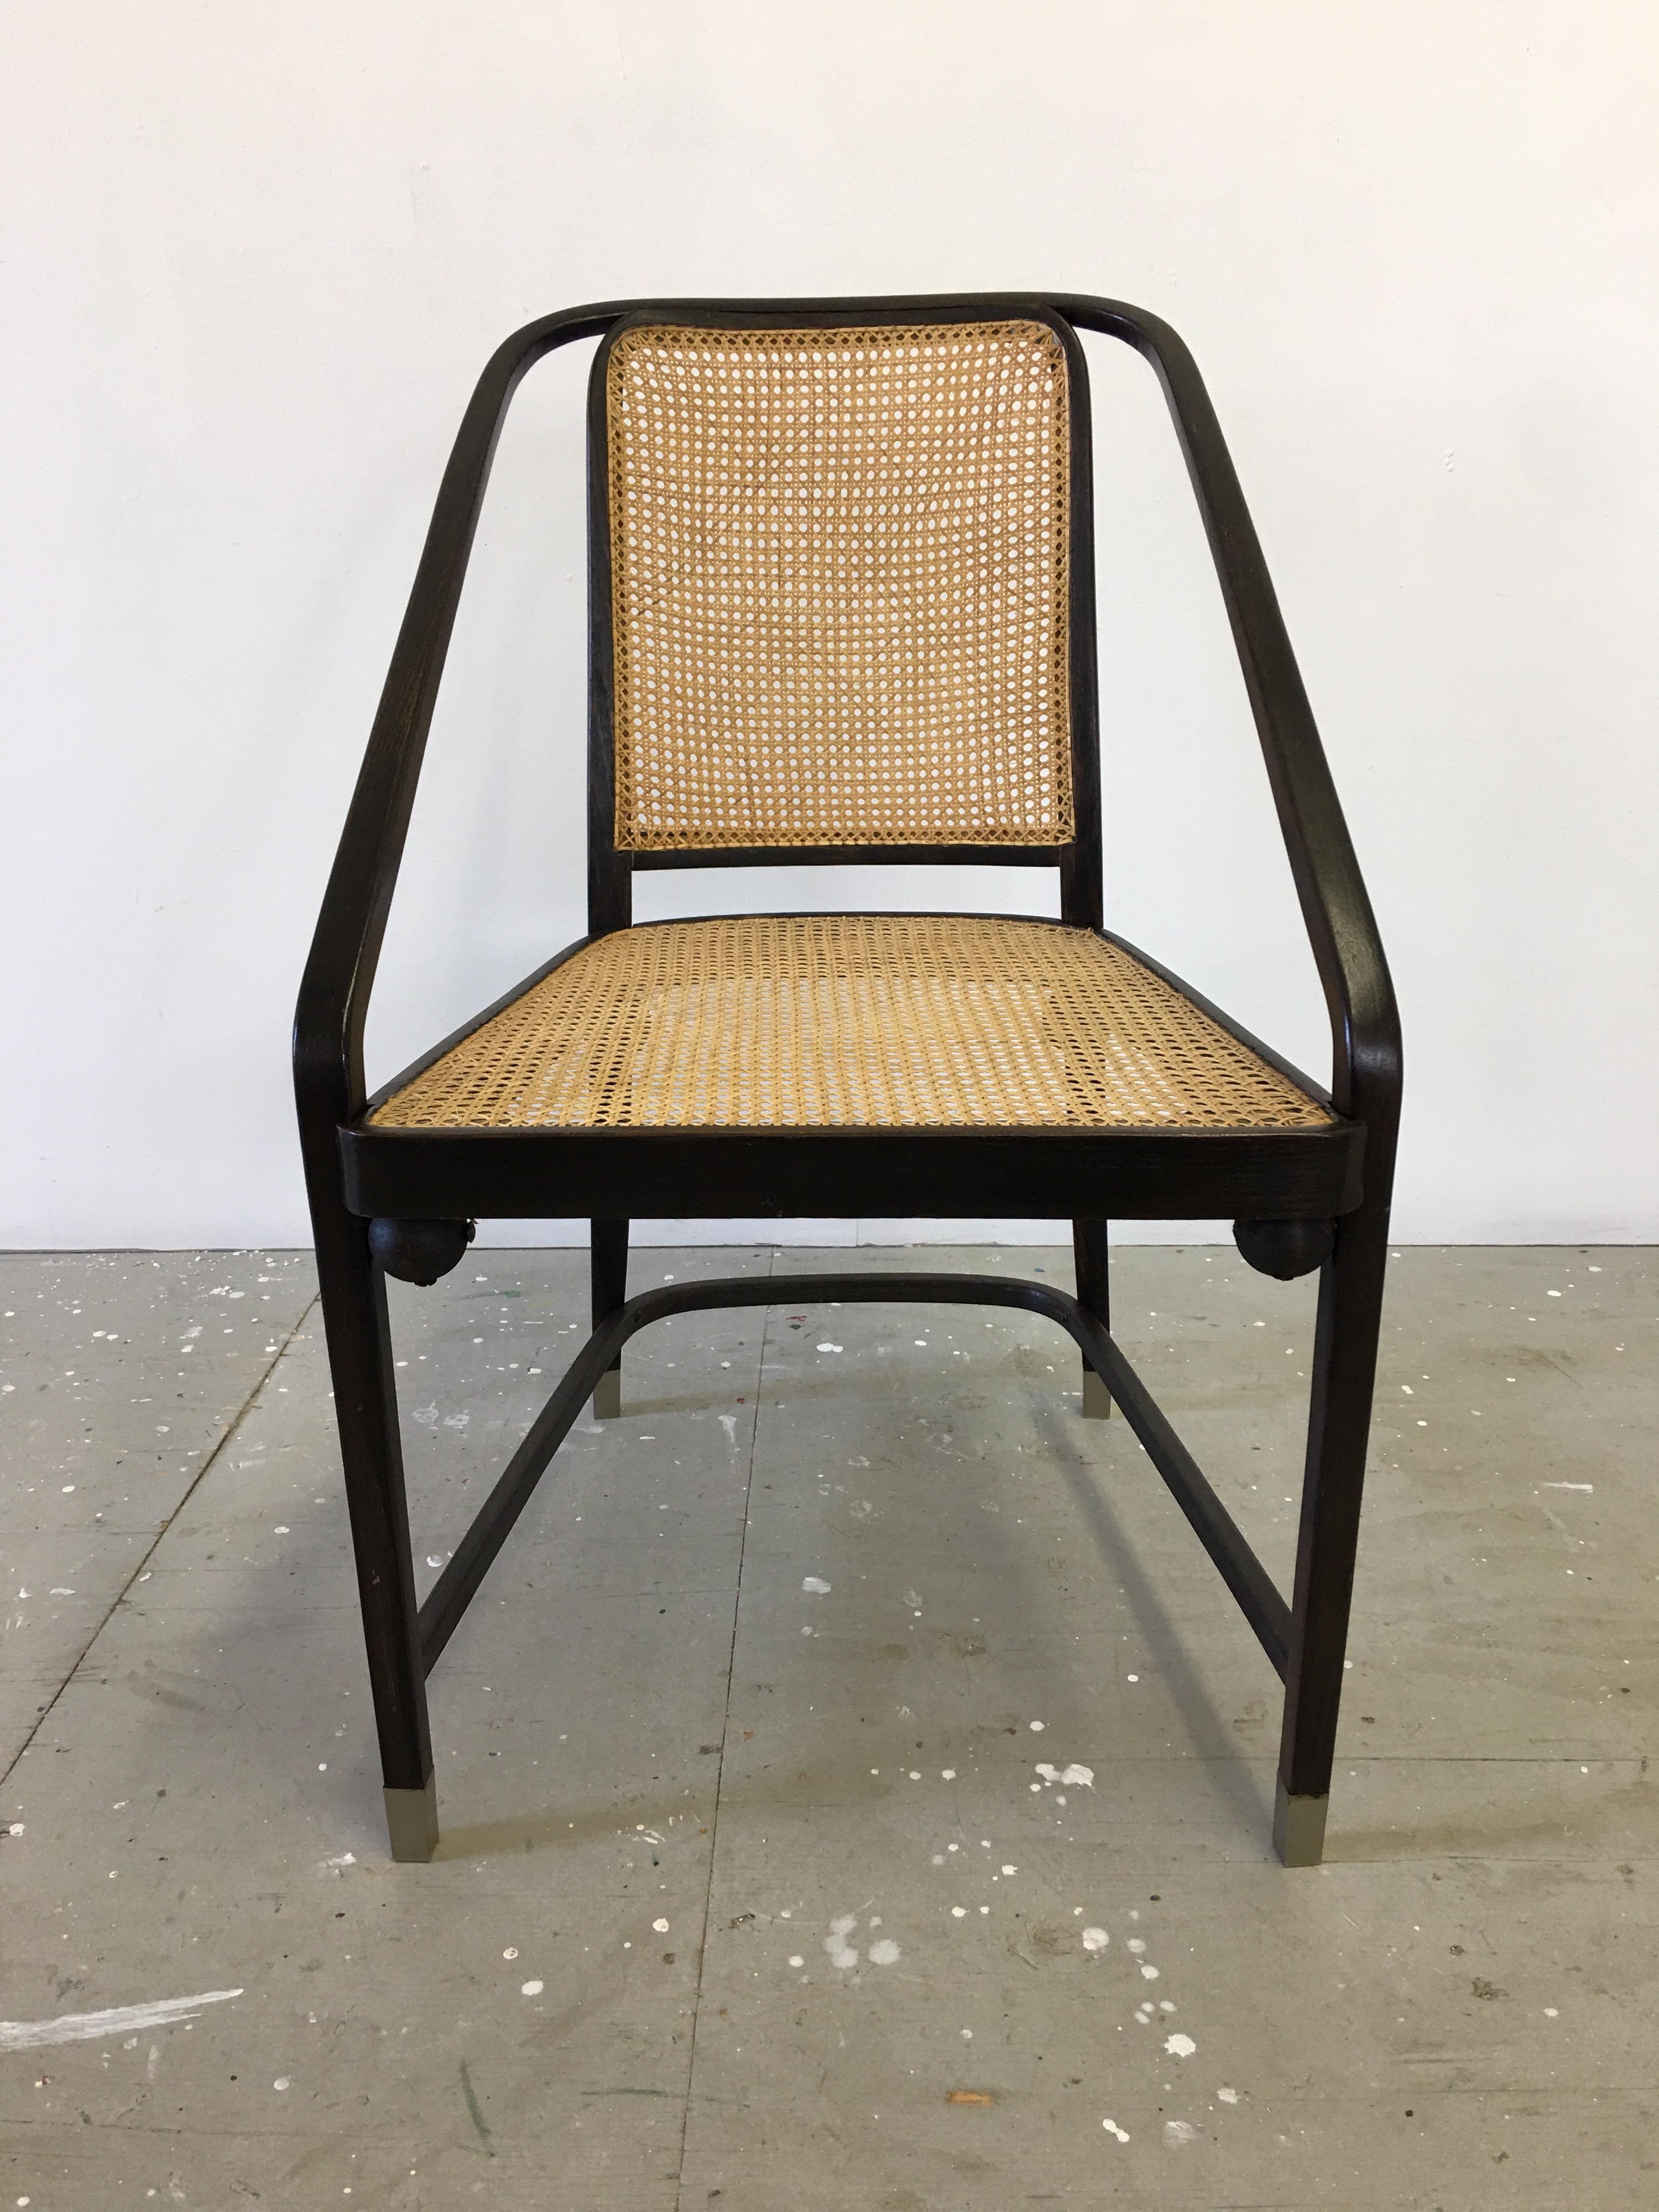 Josef Hoffmann Chair Model 725 circa 1903-1905. Rare variation with caned seat and back. Usually found with upholstered seat and back. Chair is sometimes said to be by Gustav Siegel as well. Bent Beech Frame with wood balls that help support the